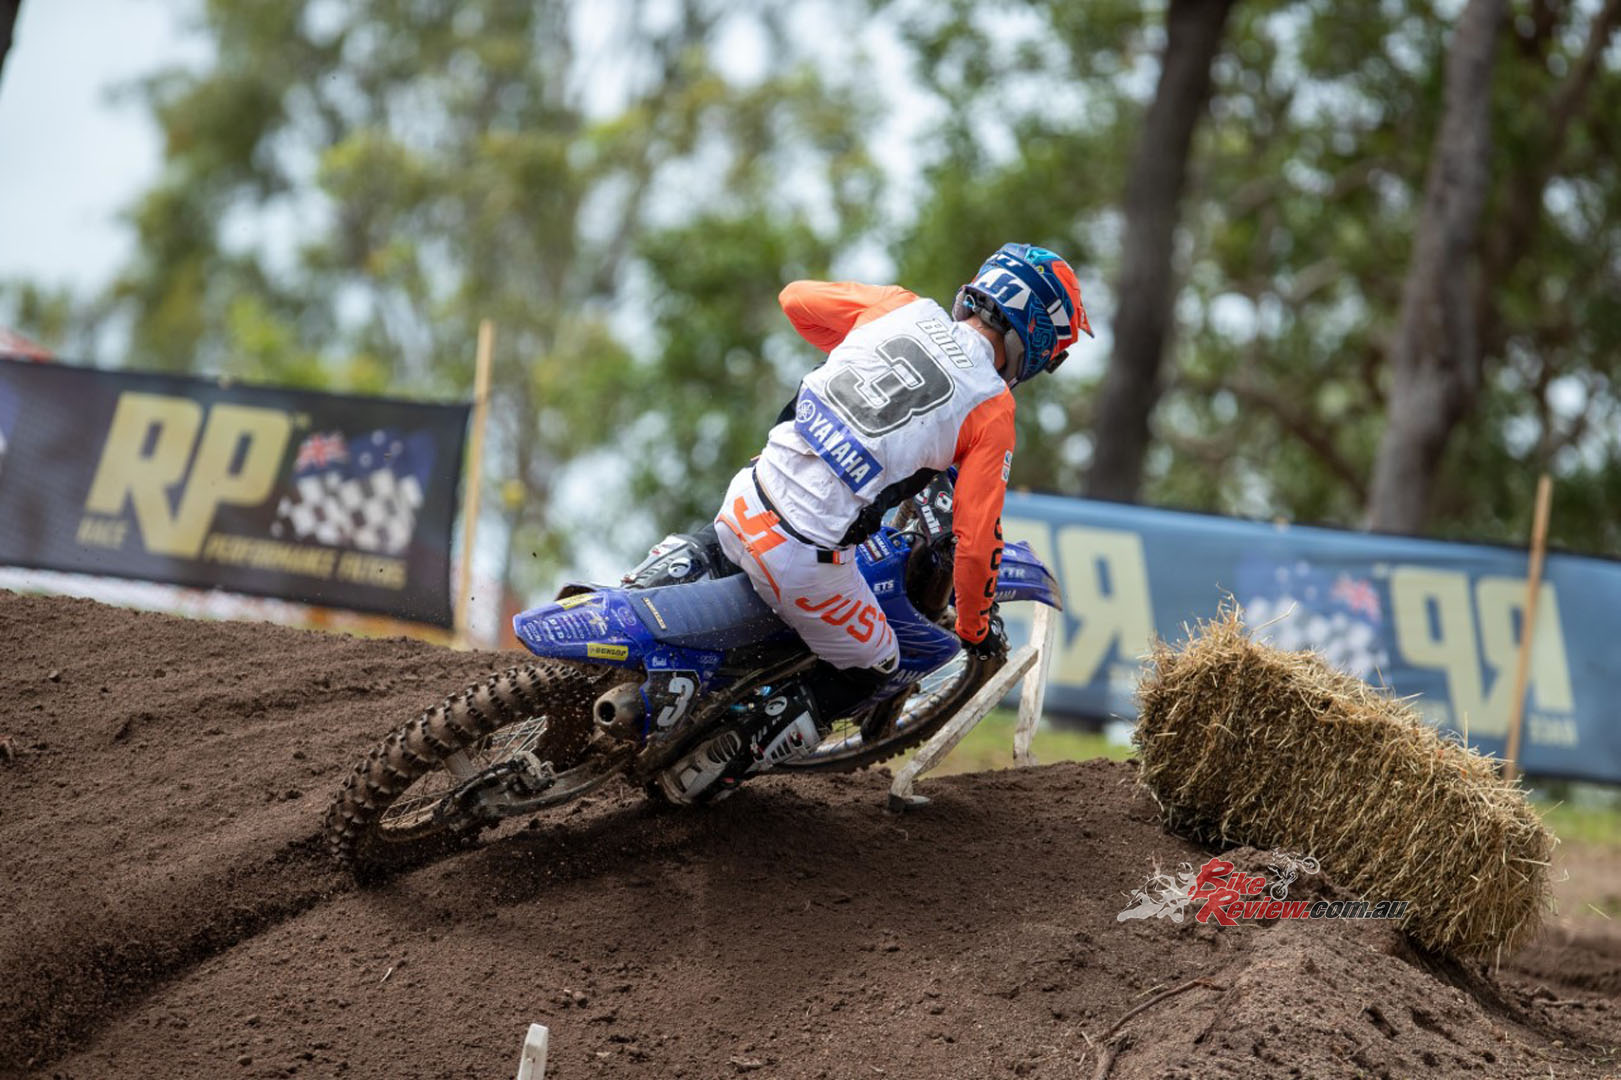 Larwood consolidated his second place in the championship while Budd jumped up to sixth after two rounds. The Pro MX Championship now moves to Albury for round three on May 1.